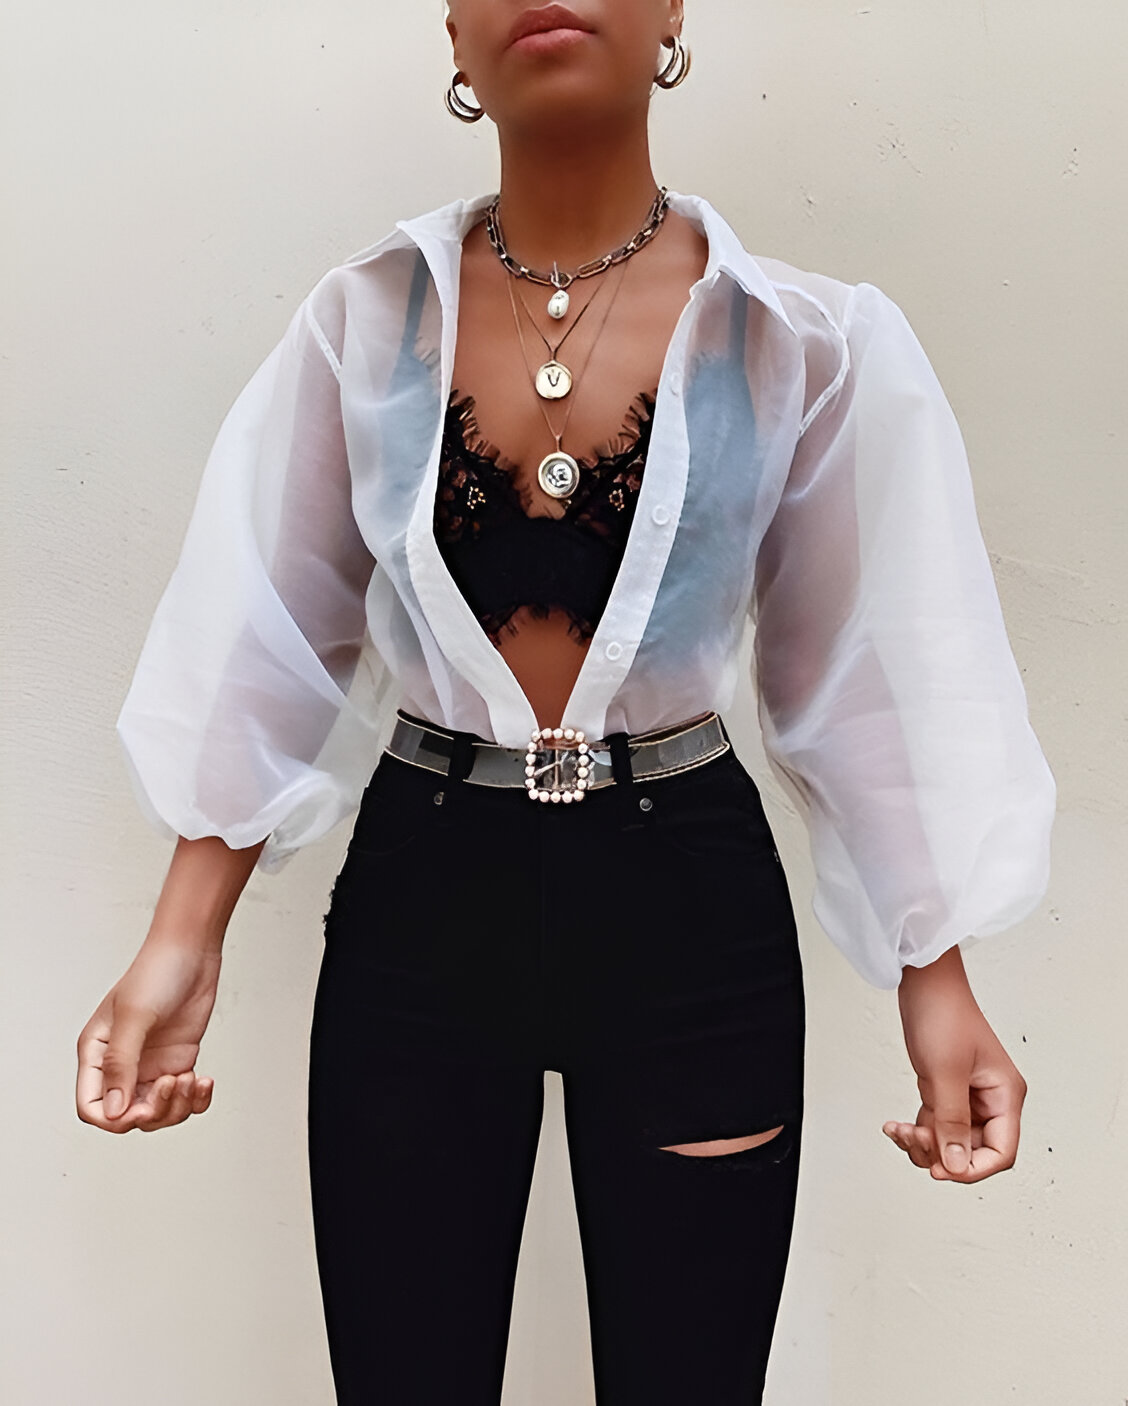 Bralette Outfits With Sheer White Blouse